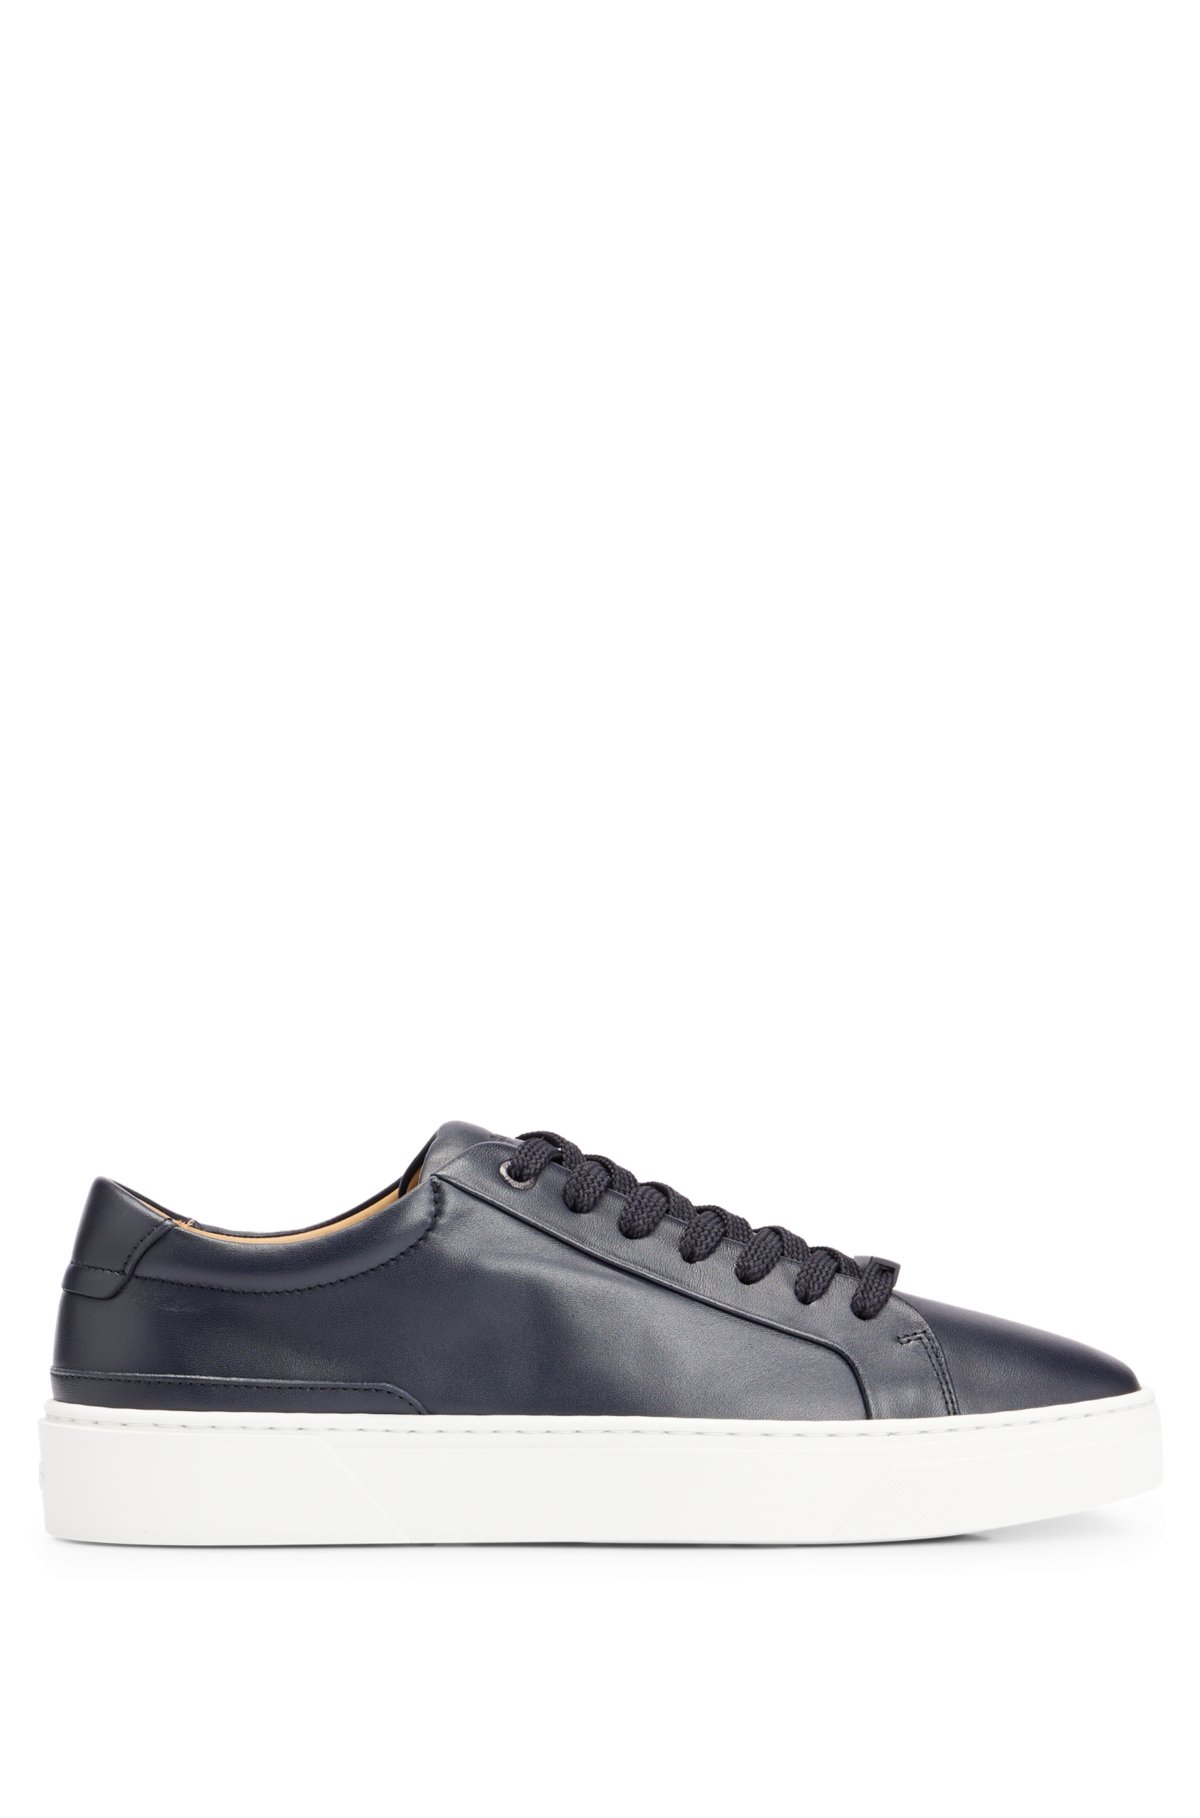 BOSS - Leather low-profile sneakers with branding and rubber outsole